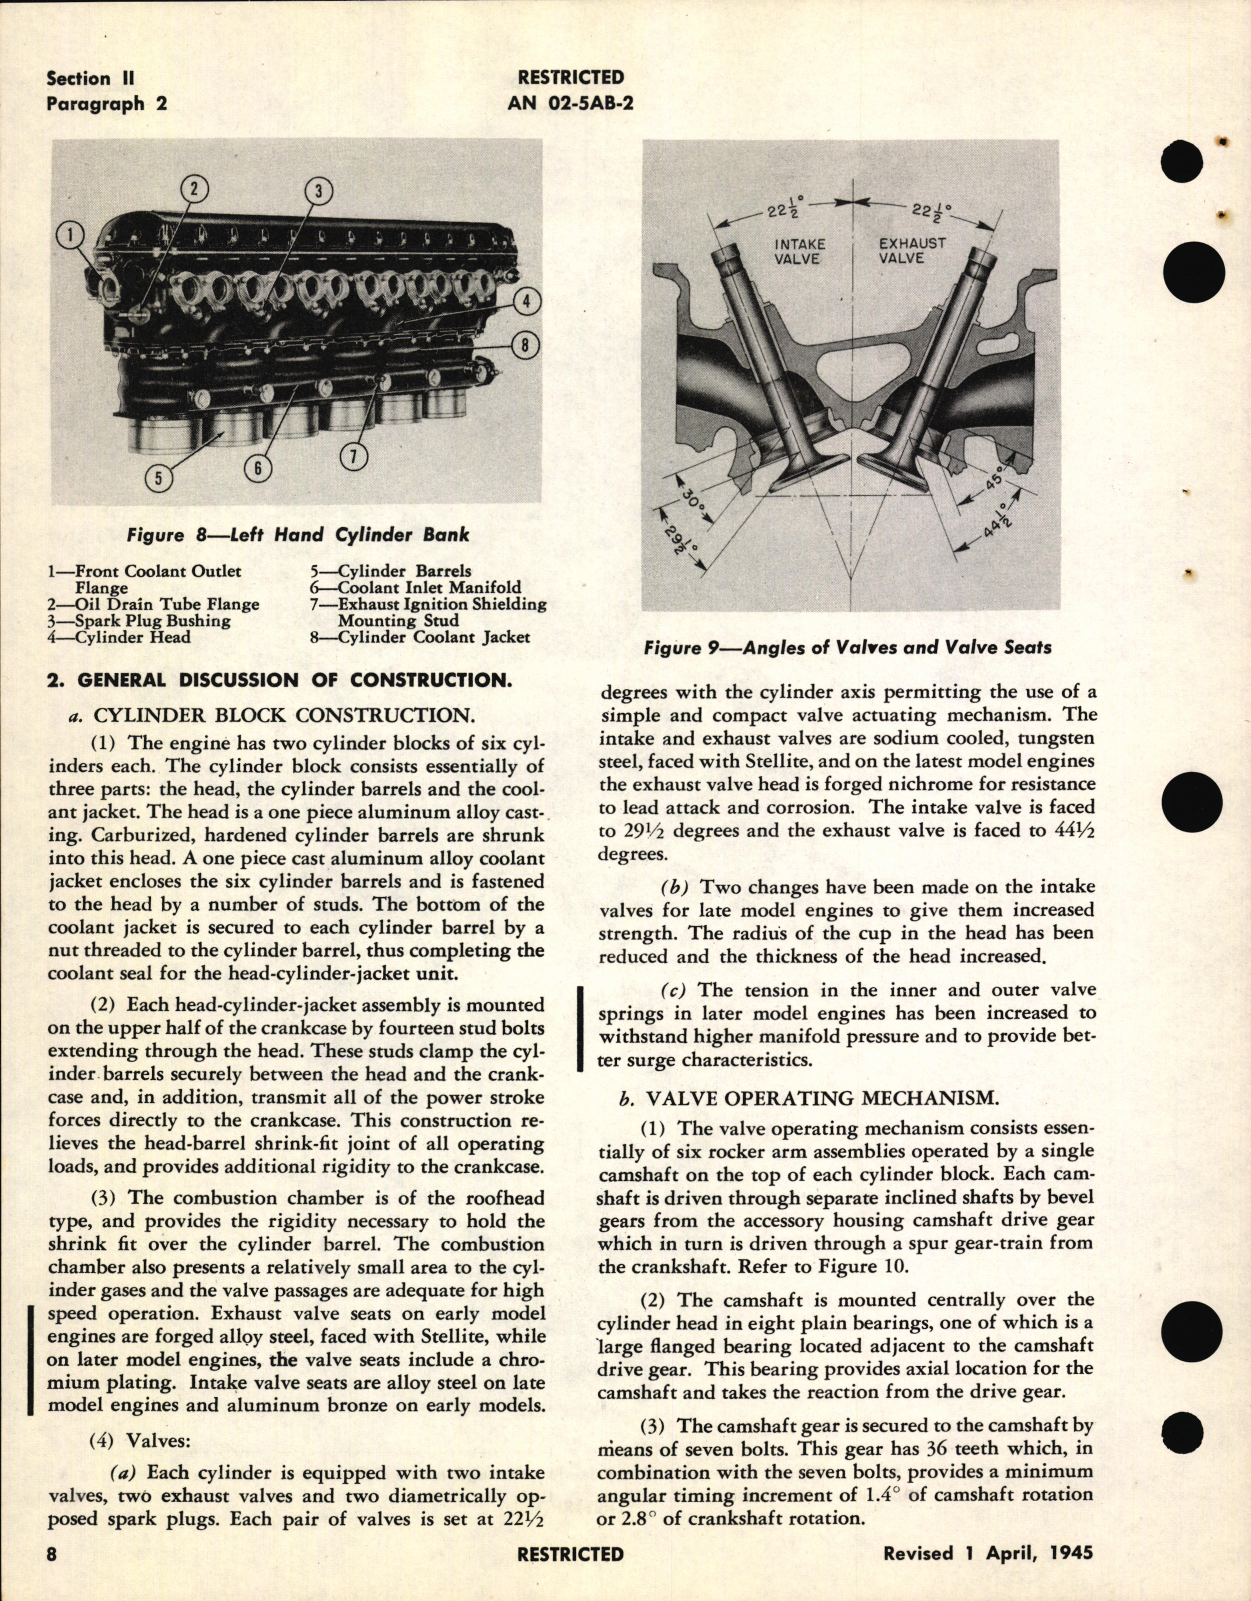 Sample page 18 from AirCorps Library document: Service Instructions for V-1710-27 thru -115 Aircraft Engines